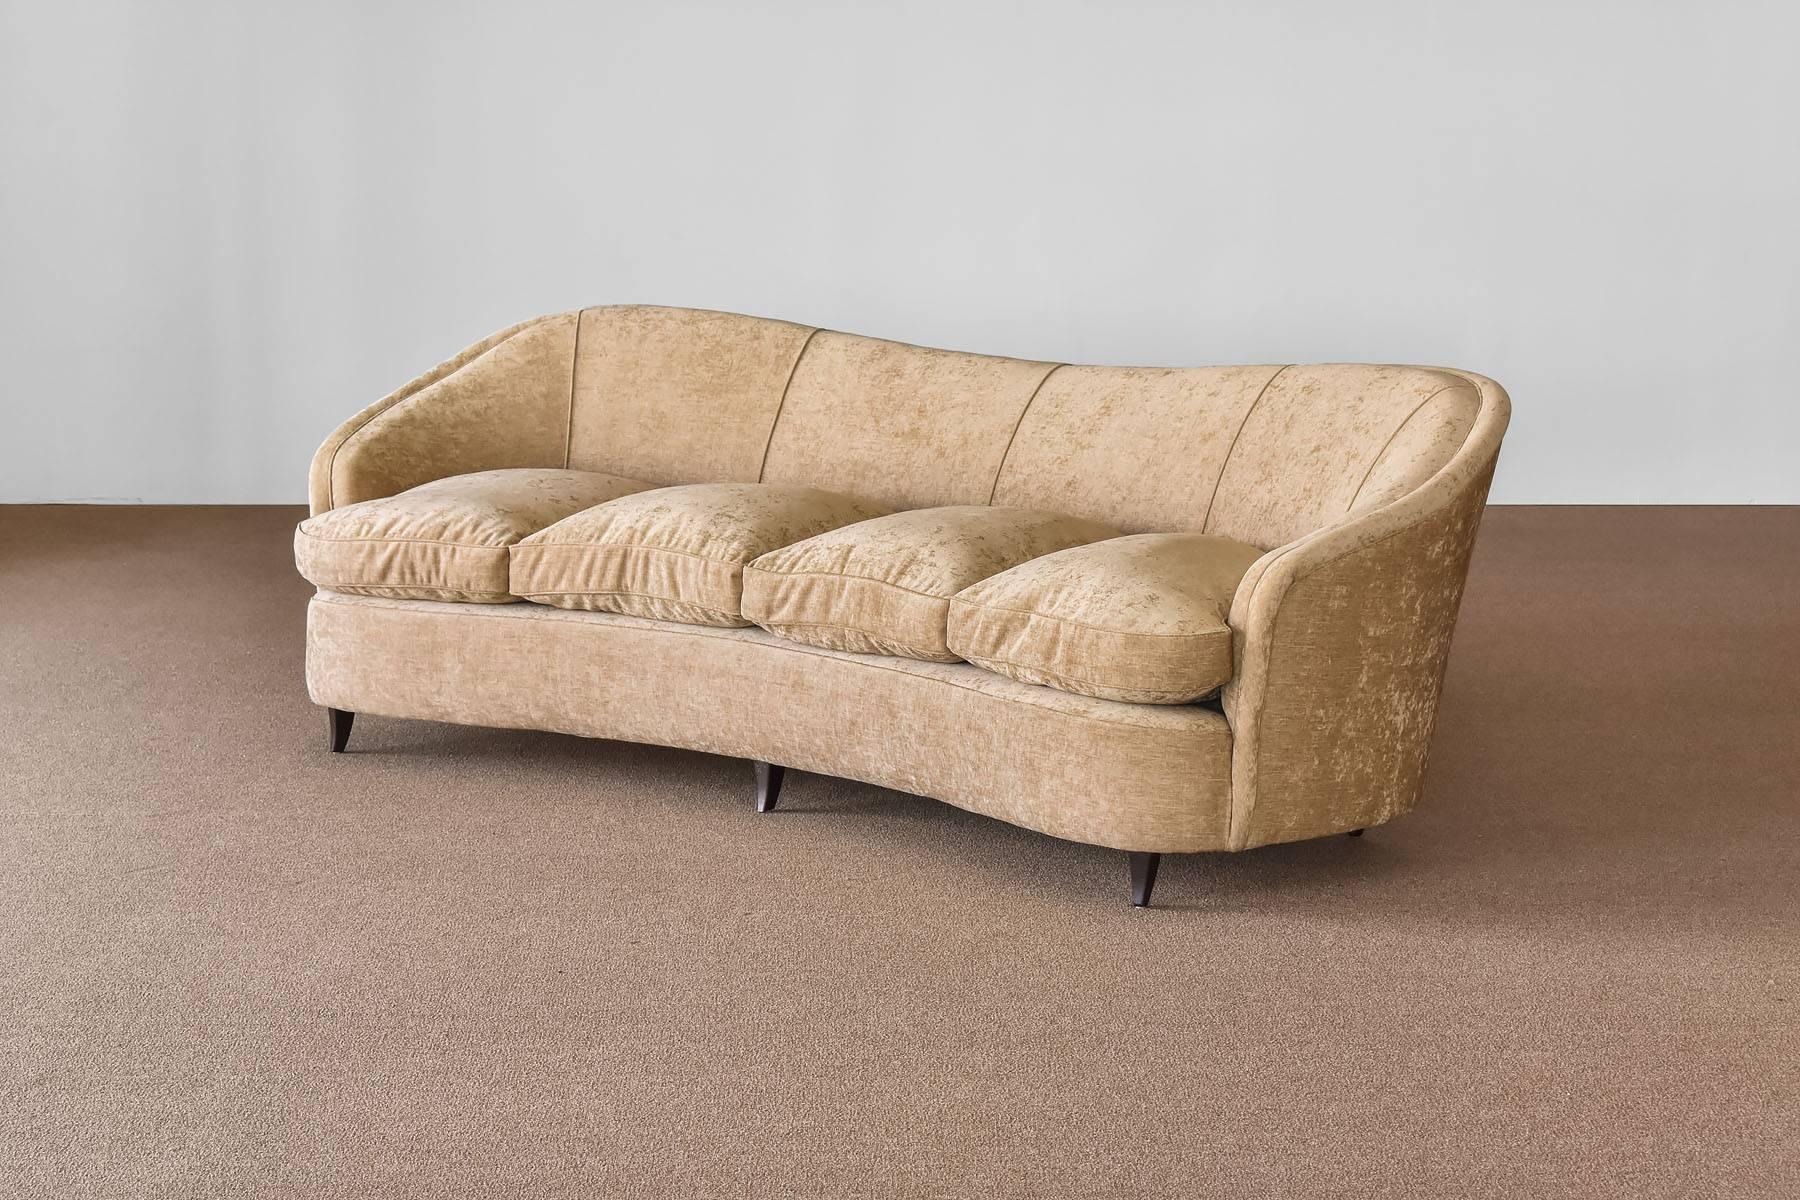 An organically shaped / curved, large four-seat sofa designed by Gio Ponti. Produced by Casa e Giardino in the 1940s. Reupholstered in a high quality beige velvet fabric. Legs in original dark stained beech. This early modernist work has the scale